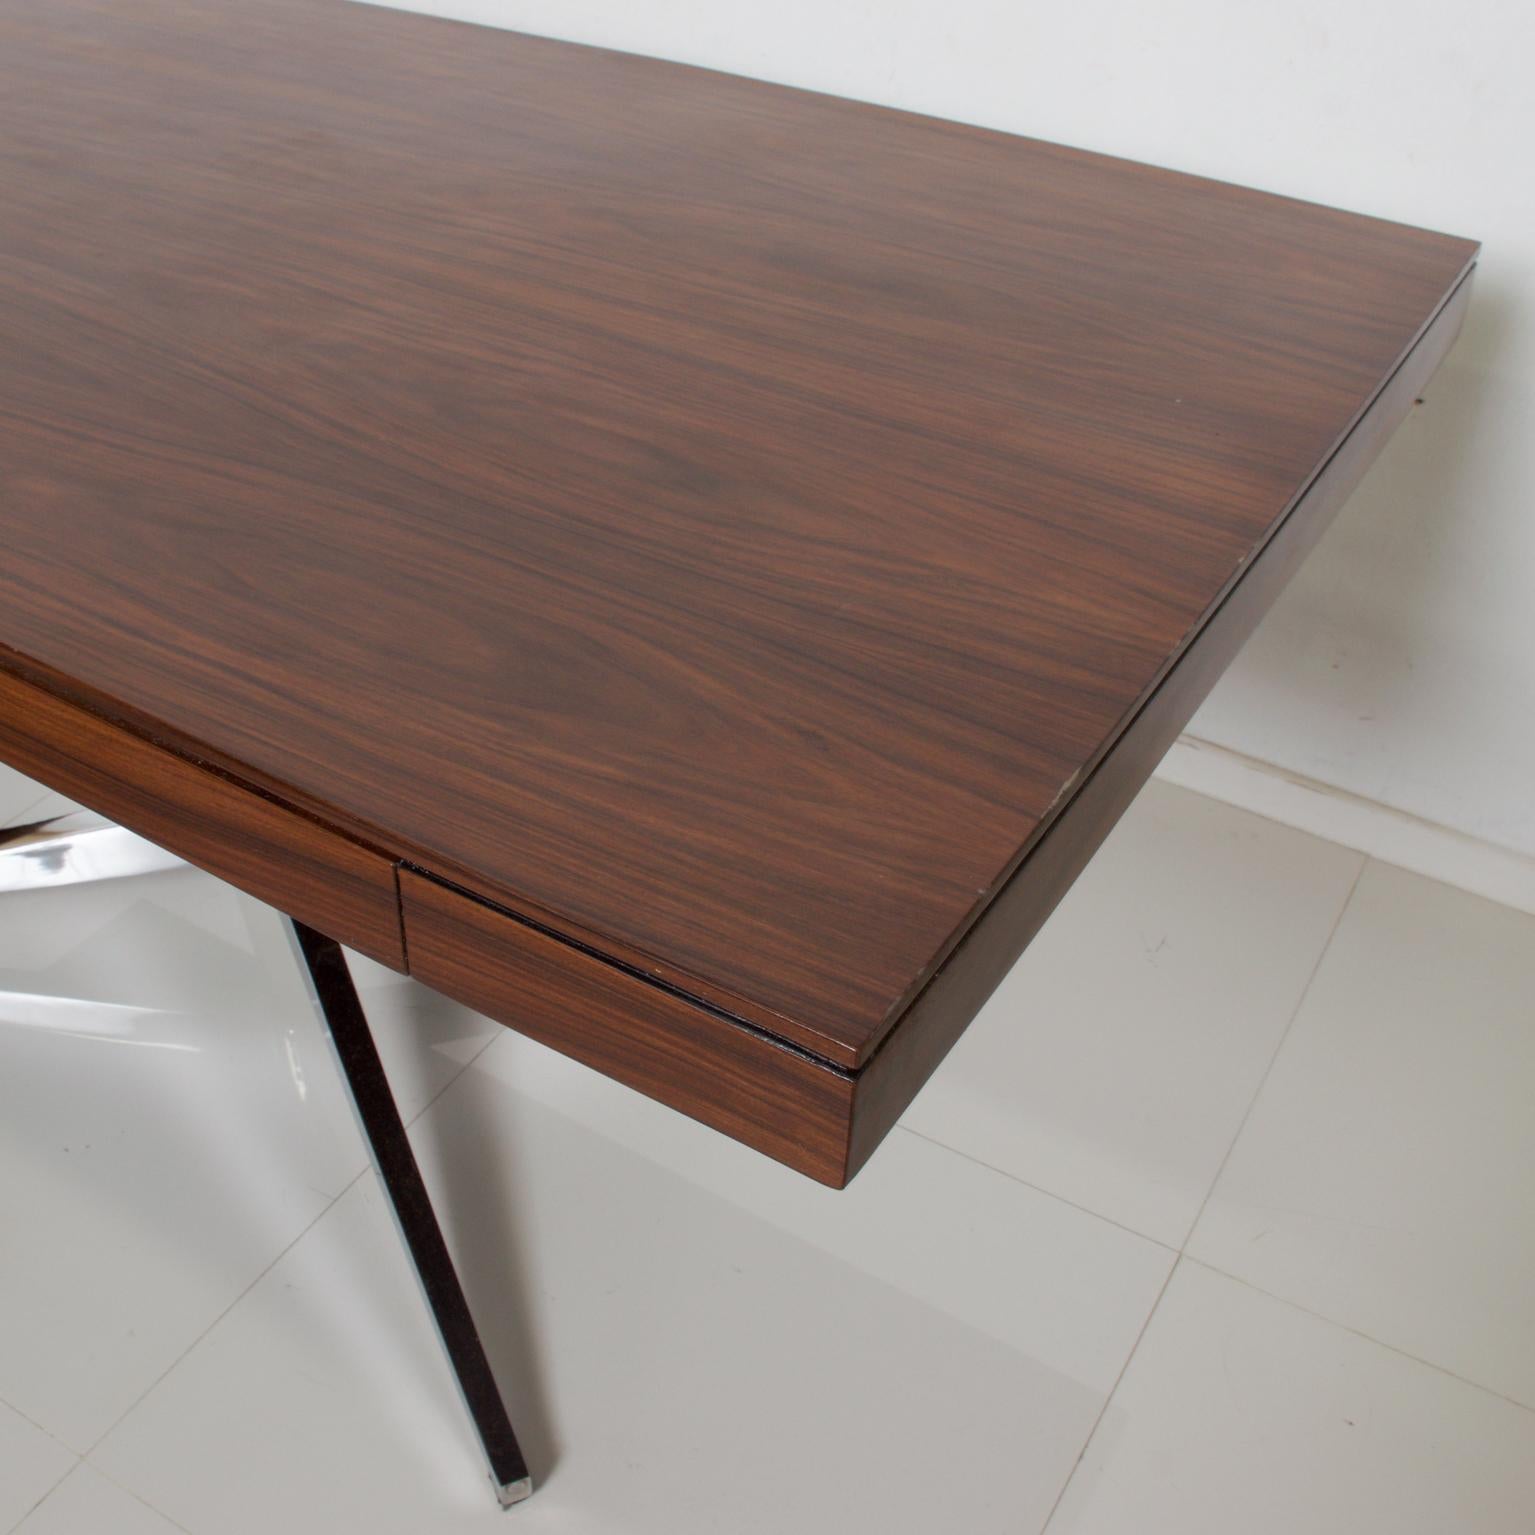 American Florence KNOLL Executive Partners DESK Rosewood w/ Chrome Legs Refined Classic